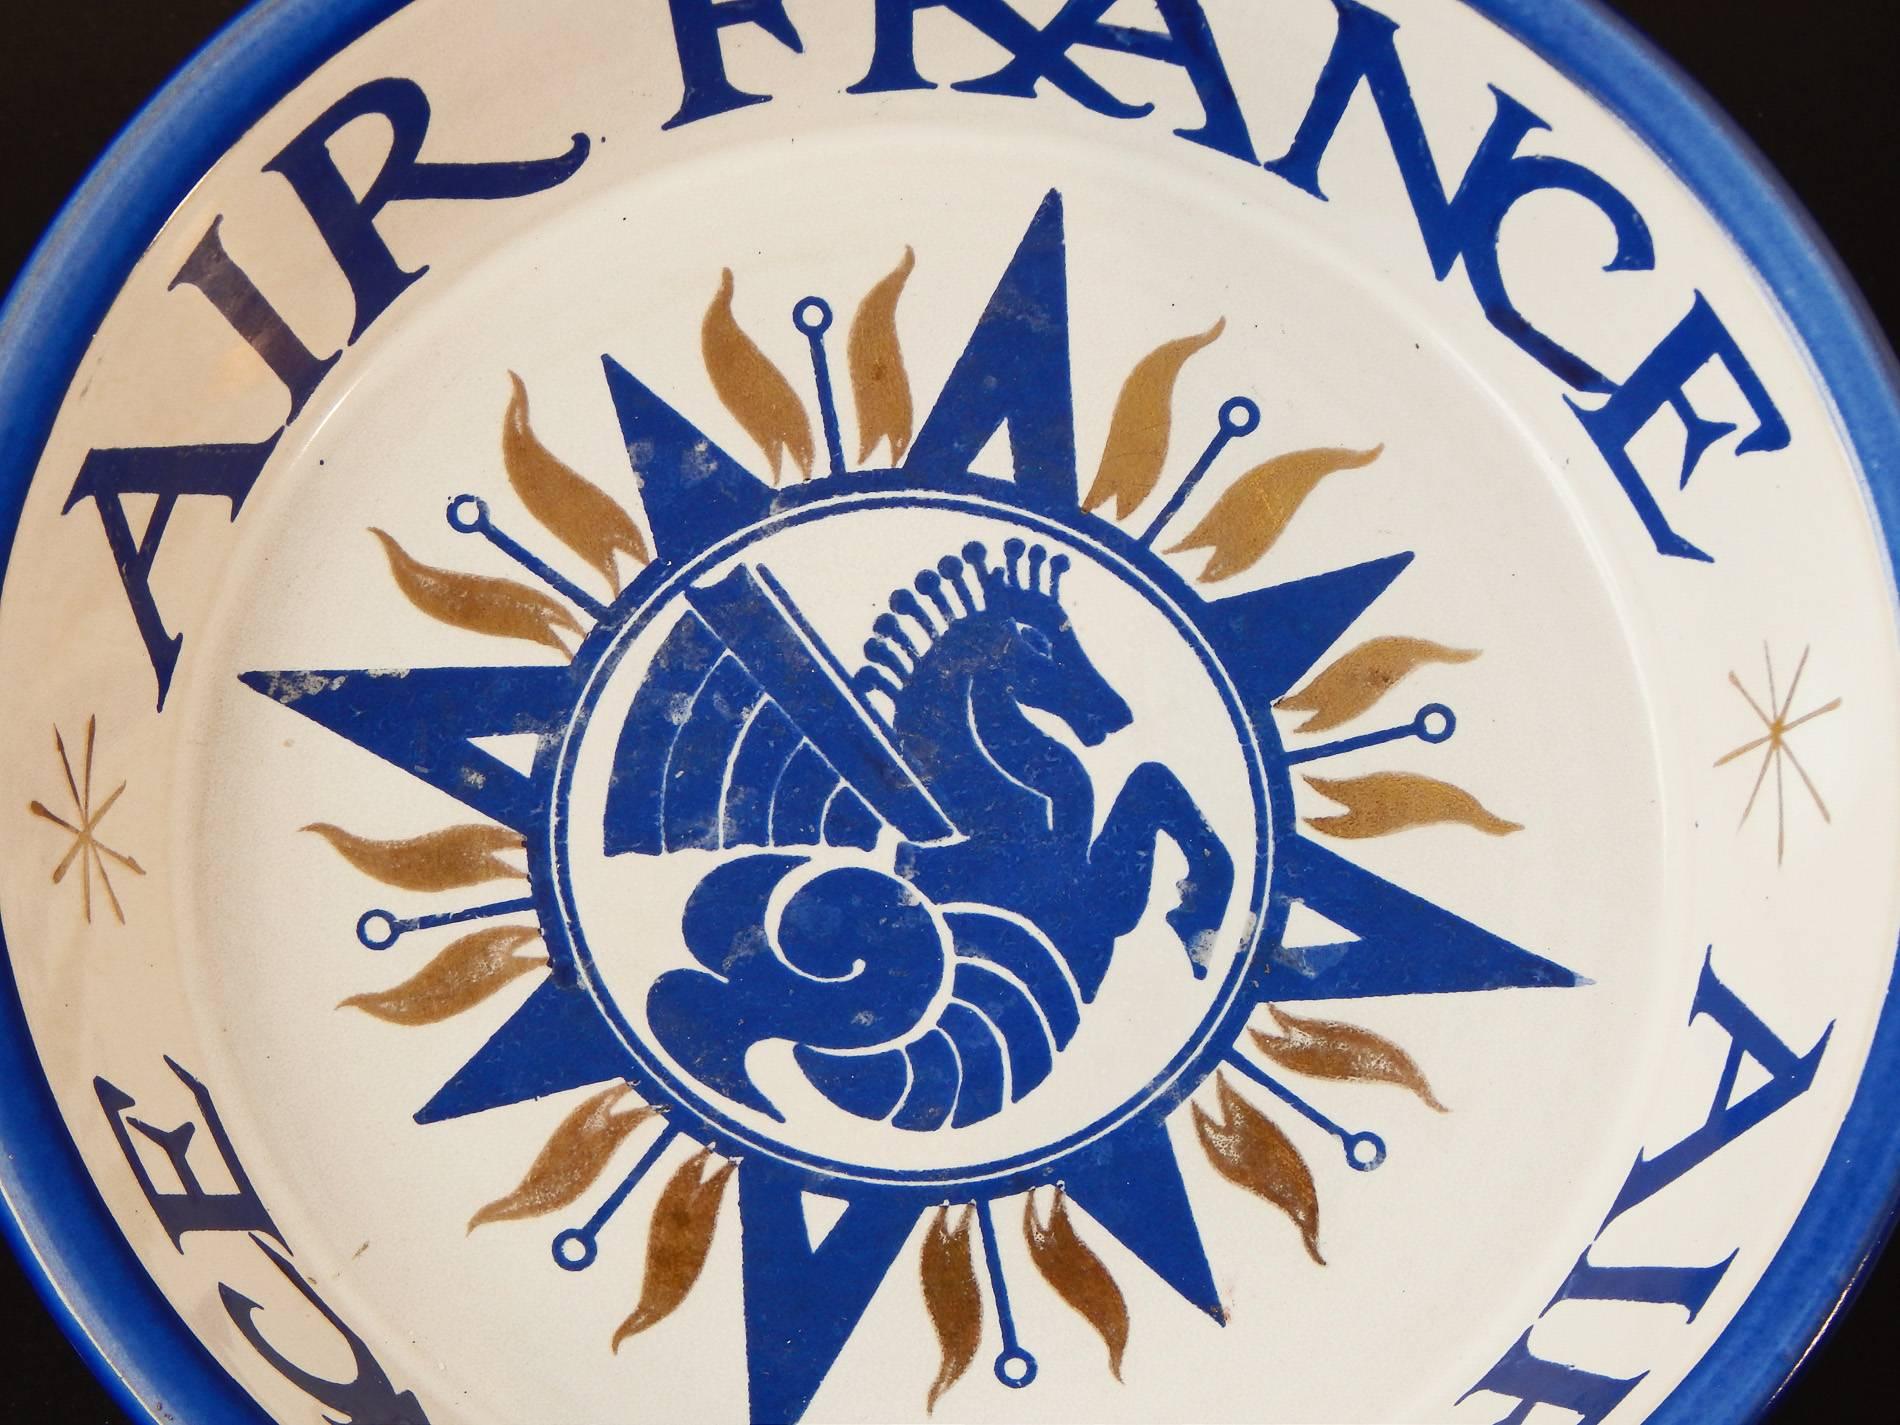 This rare and striking bowl was created for Air France in the 1940s by Marcel Noverraz, who formed a highly-regarded pottery in Carouge, located in the French-speaking sector of Switzerland. When Air France was formed via the merger of several